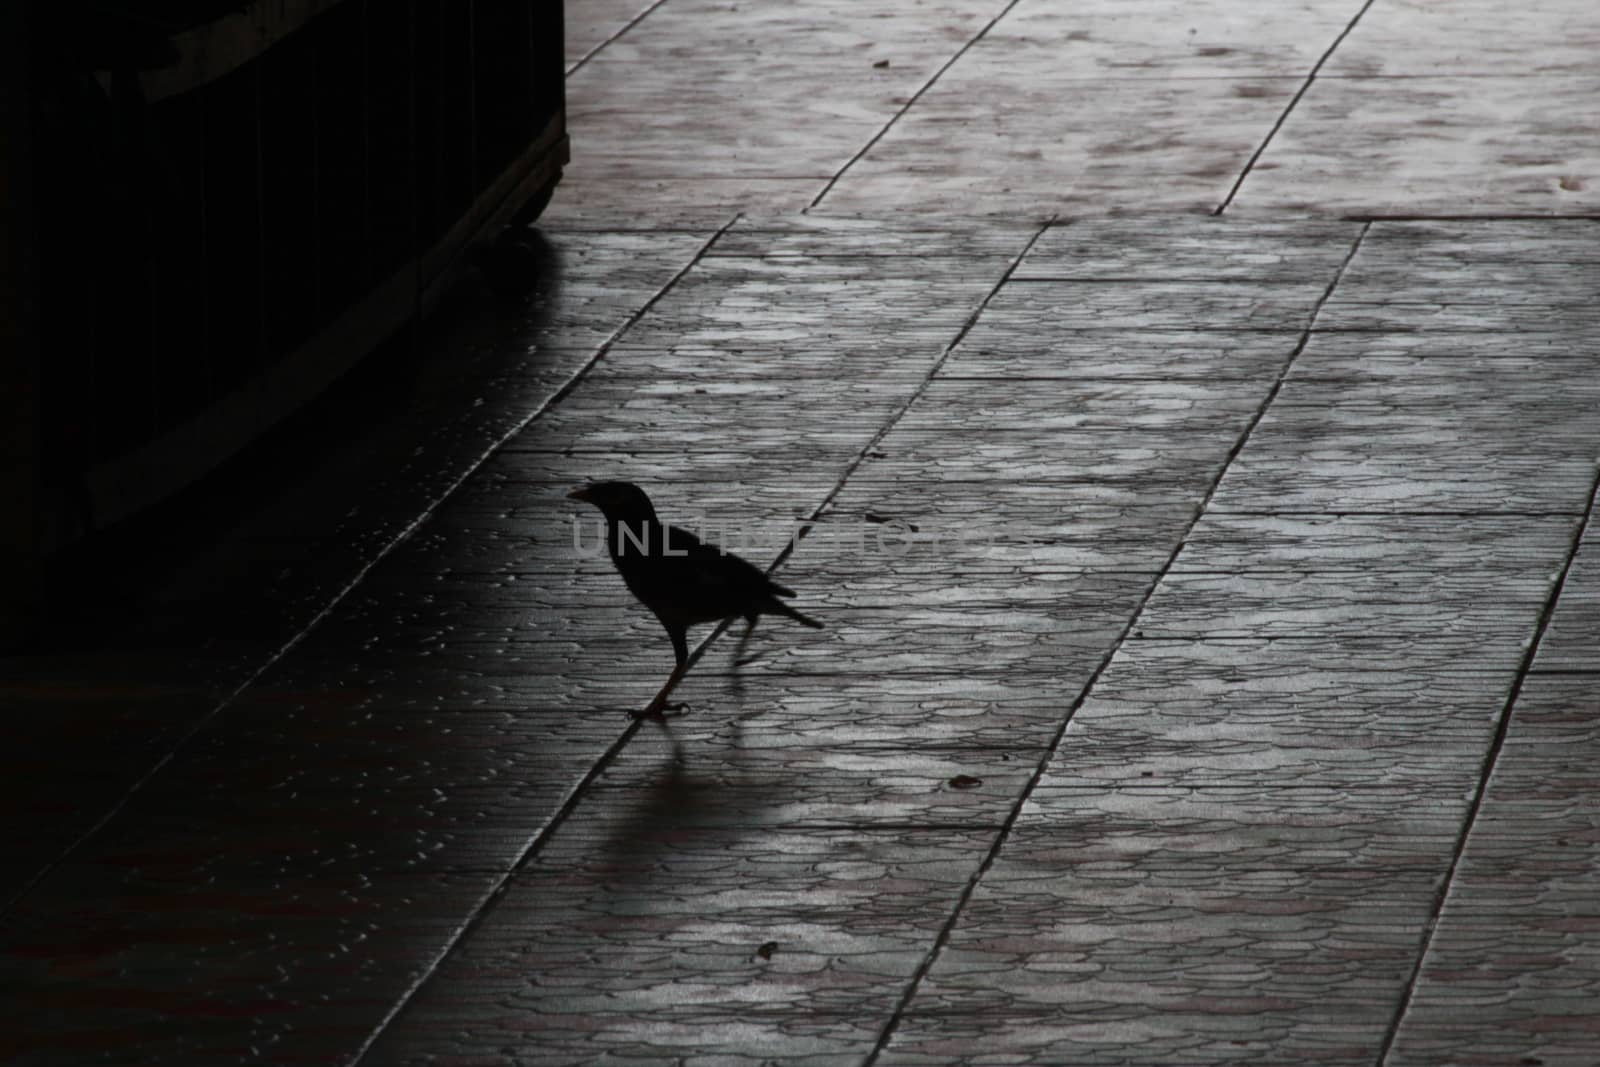 The bird is walking to find something to eat around the building ground.